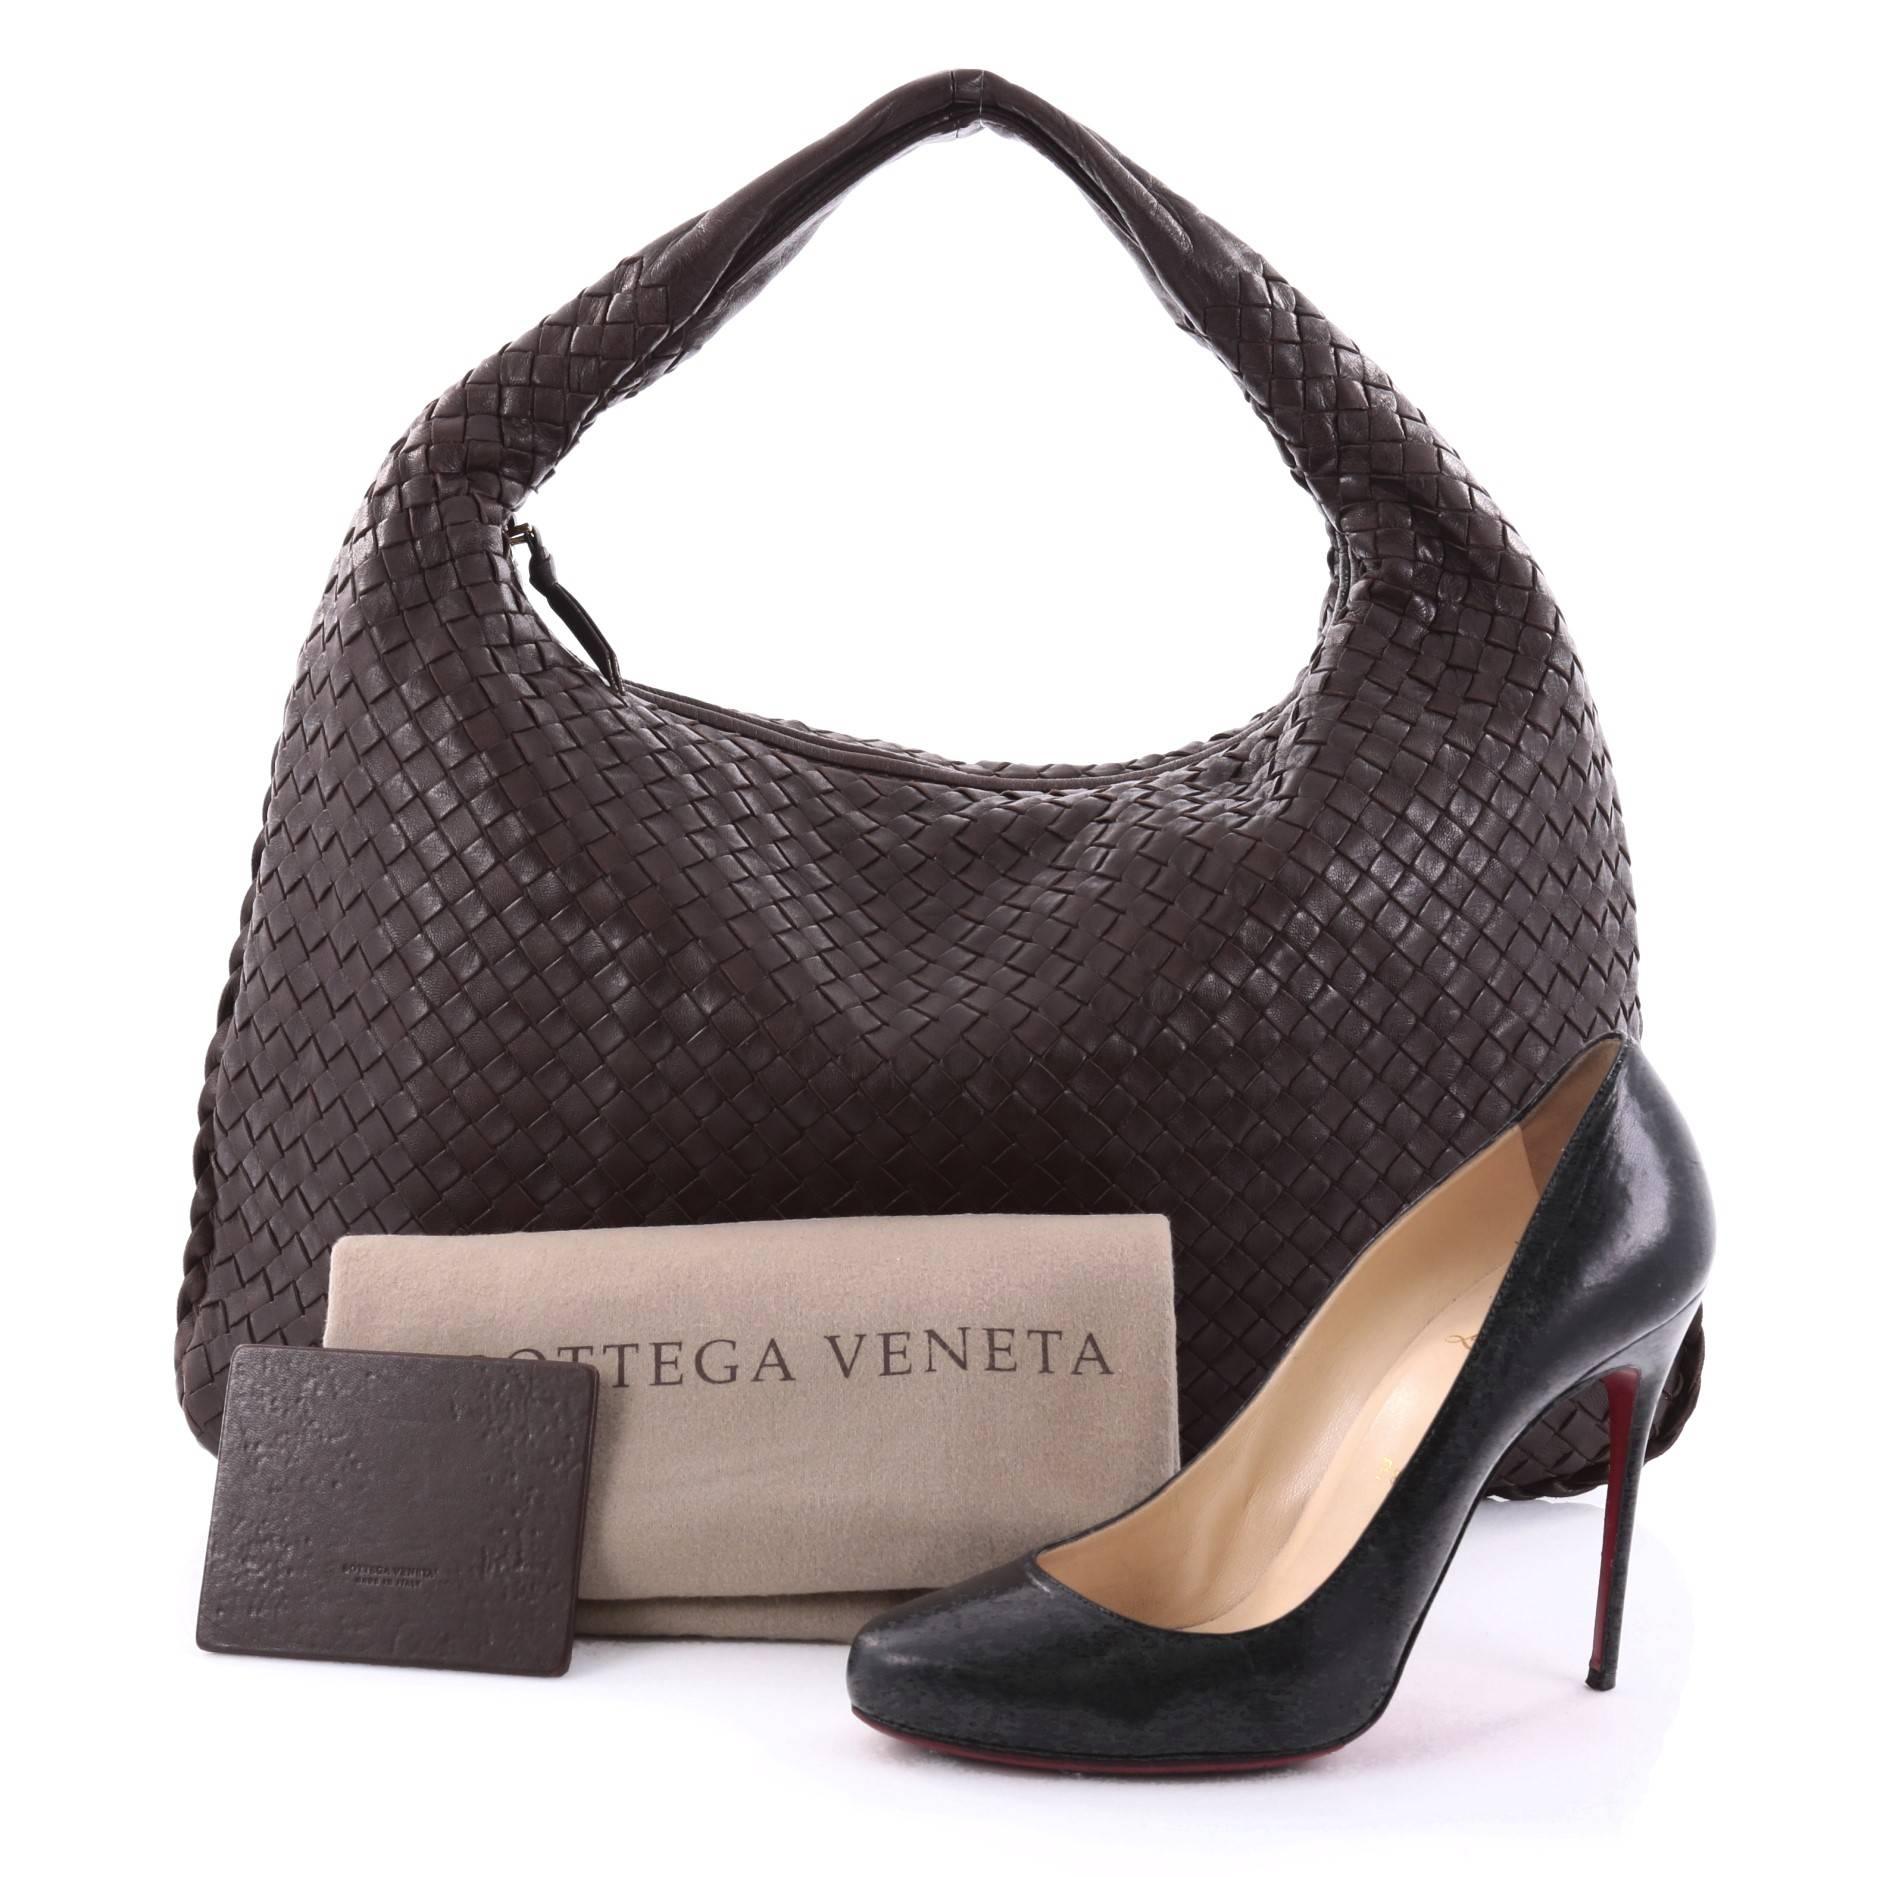 This authentic Bottega Veneta Veneta Hobo Intrecciato Nappa Large is a timelessly elegant bag with a casual silhouette. Crafted from brown nappa leather woven in Bottega Veneta's signature intrecciato method, this effortless, exquisite hobo features